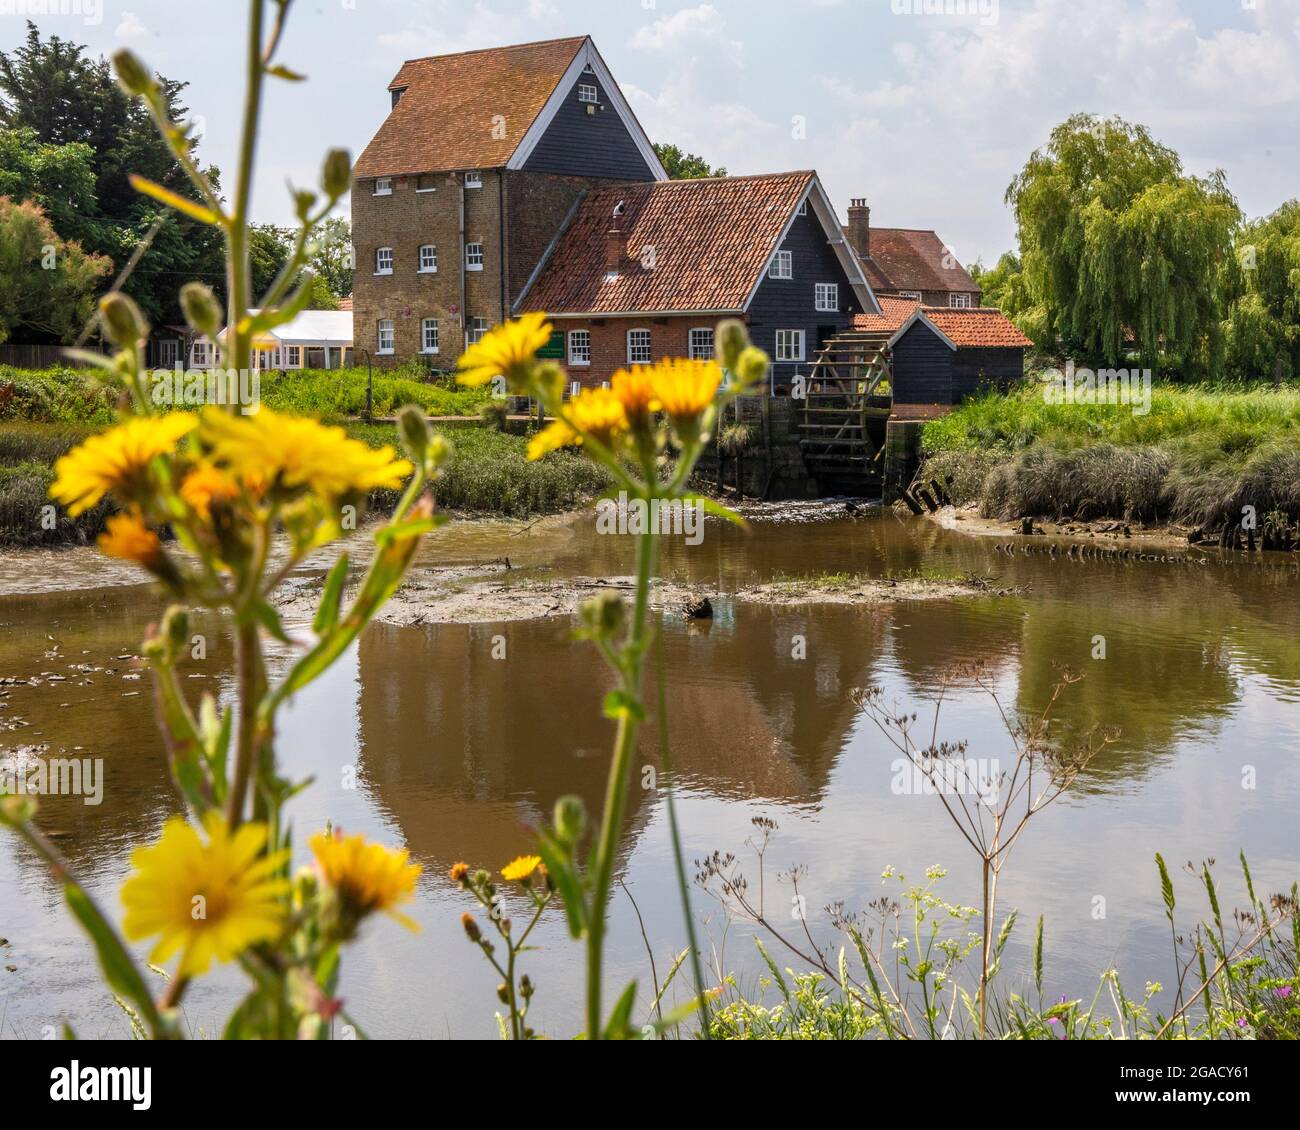 Essex, UK - July 20th 2021: A view of the historic Tide Mill in the village of Battlesbridge in Essex, UK. Stock Photo